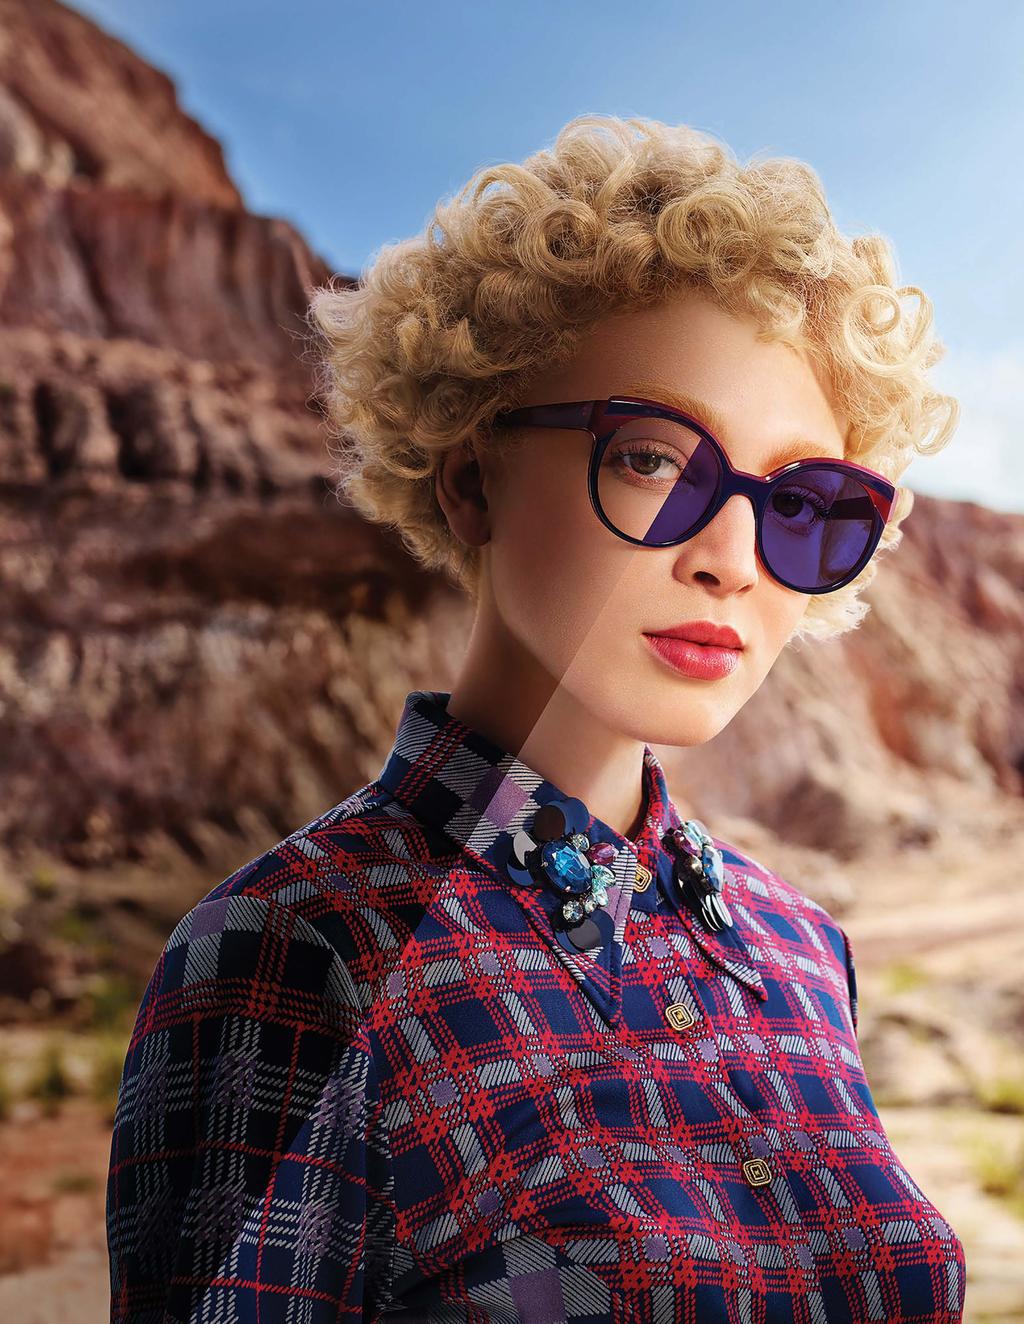 63% OF EYEGLASS WEARERS EXPECT THEIR GLASSES TO GIVE THEM A UNQIUE LOOK 2 Transitions Signature lenses style colors feature four new vibrant fashion colors sapphire, amethyst, amber and emerald and